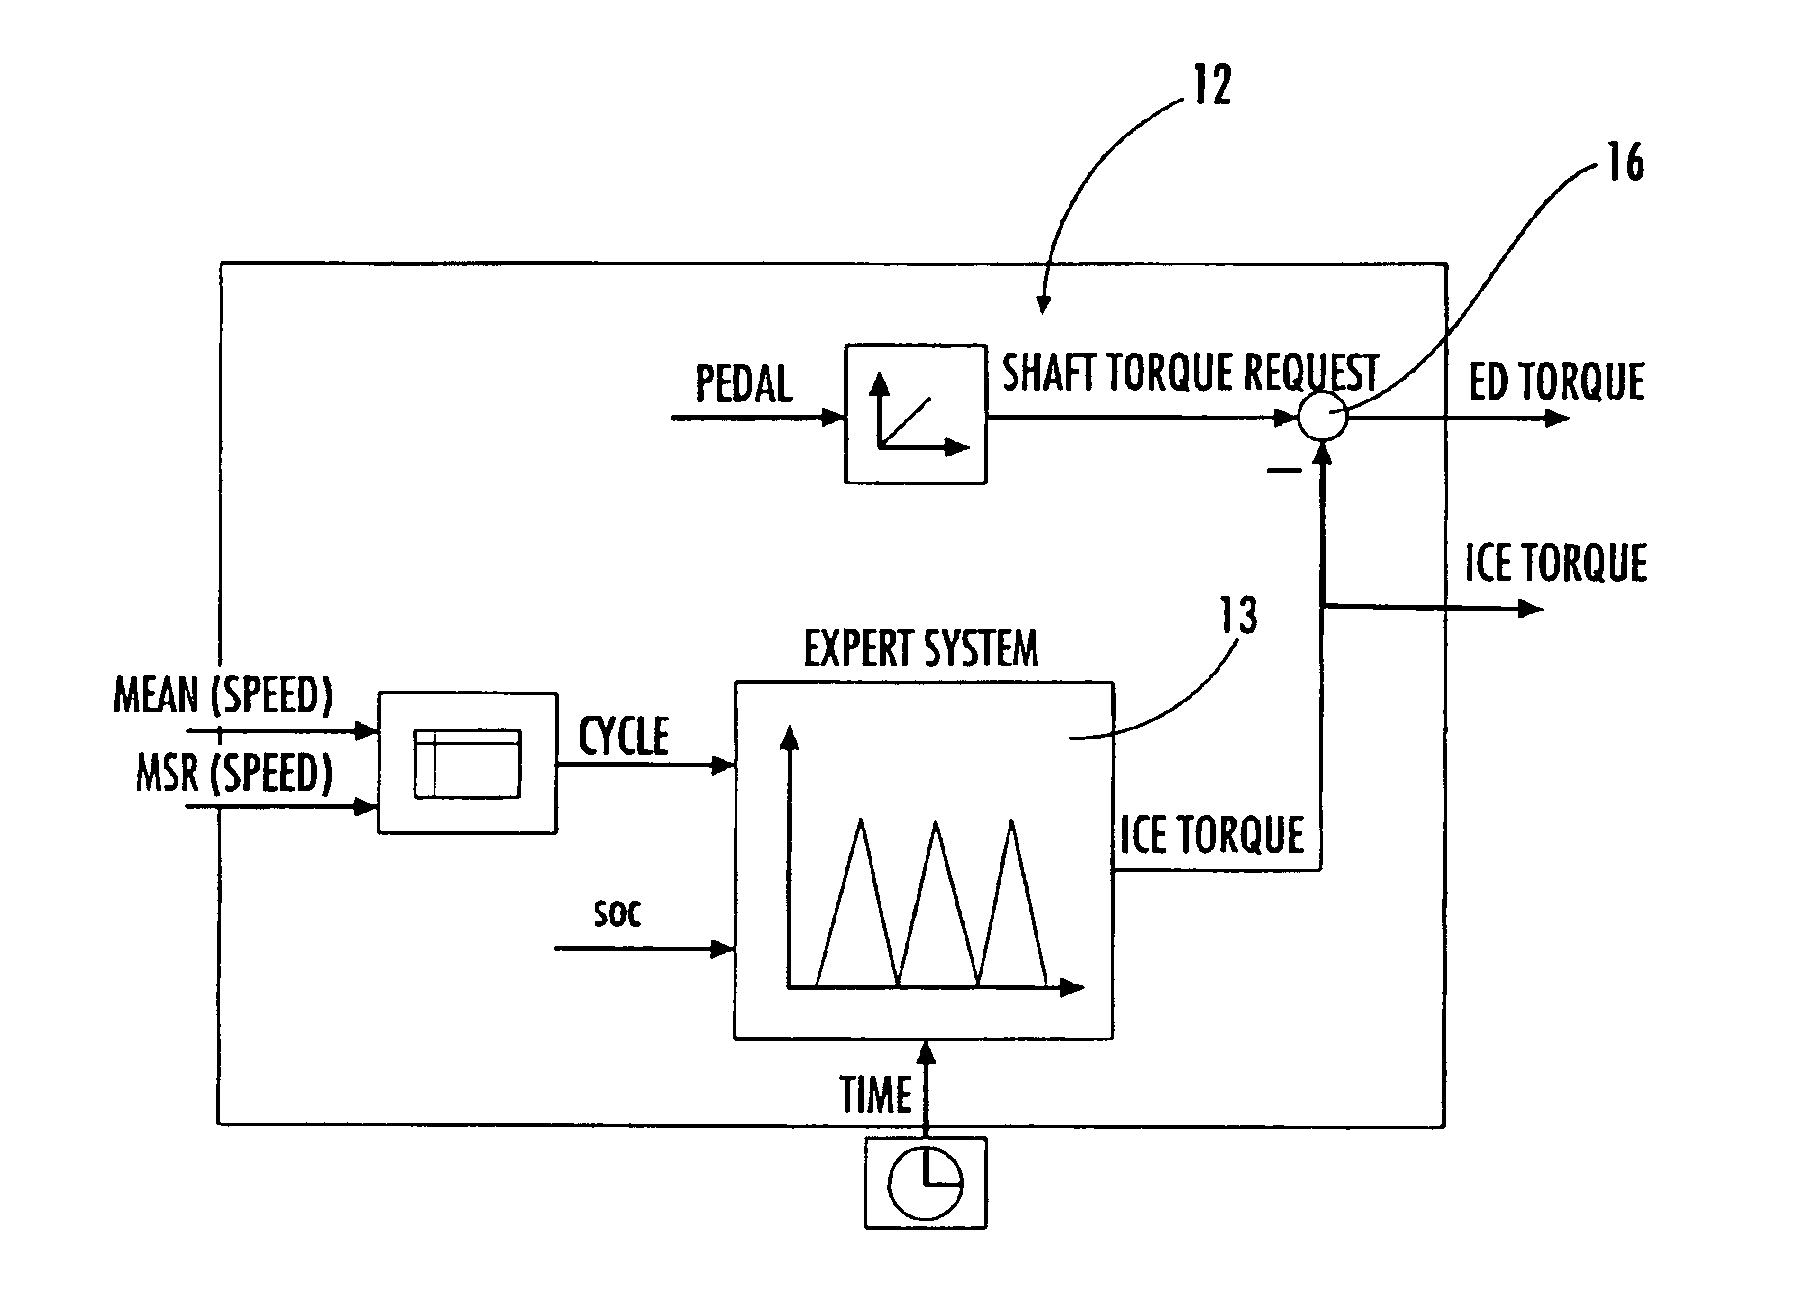 Electronic control system for torque distribution in hybrid vehicles